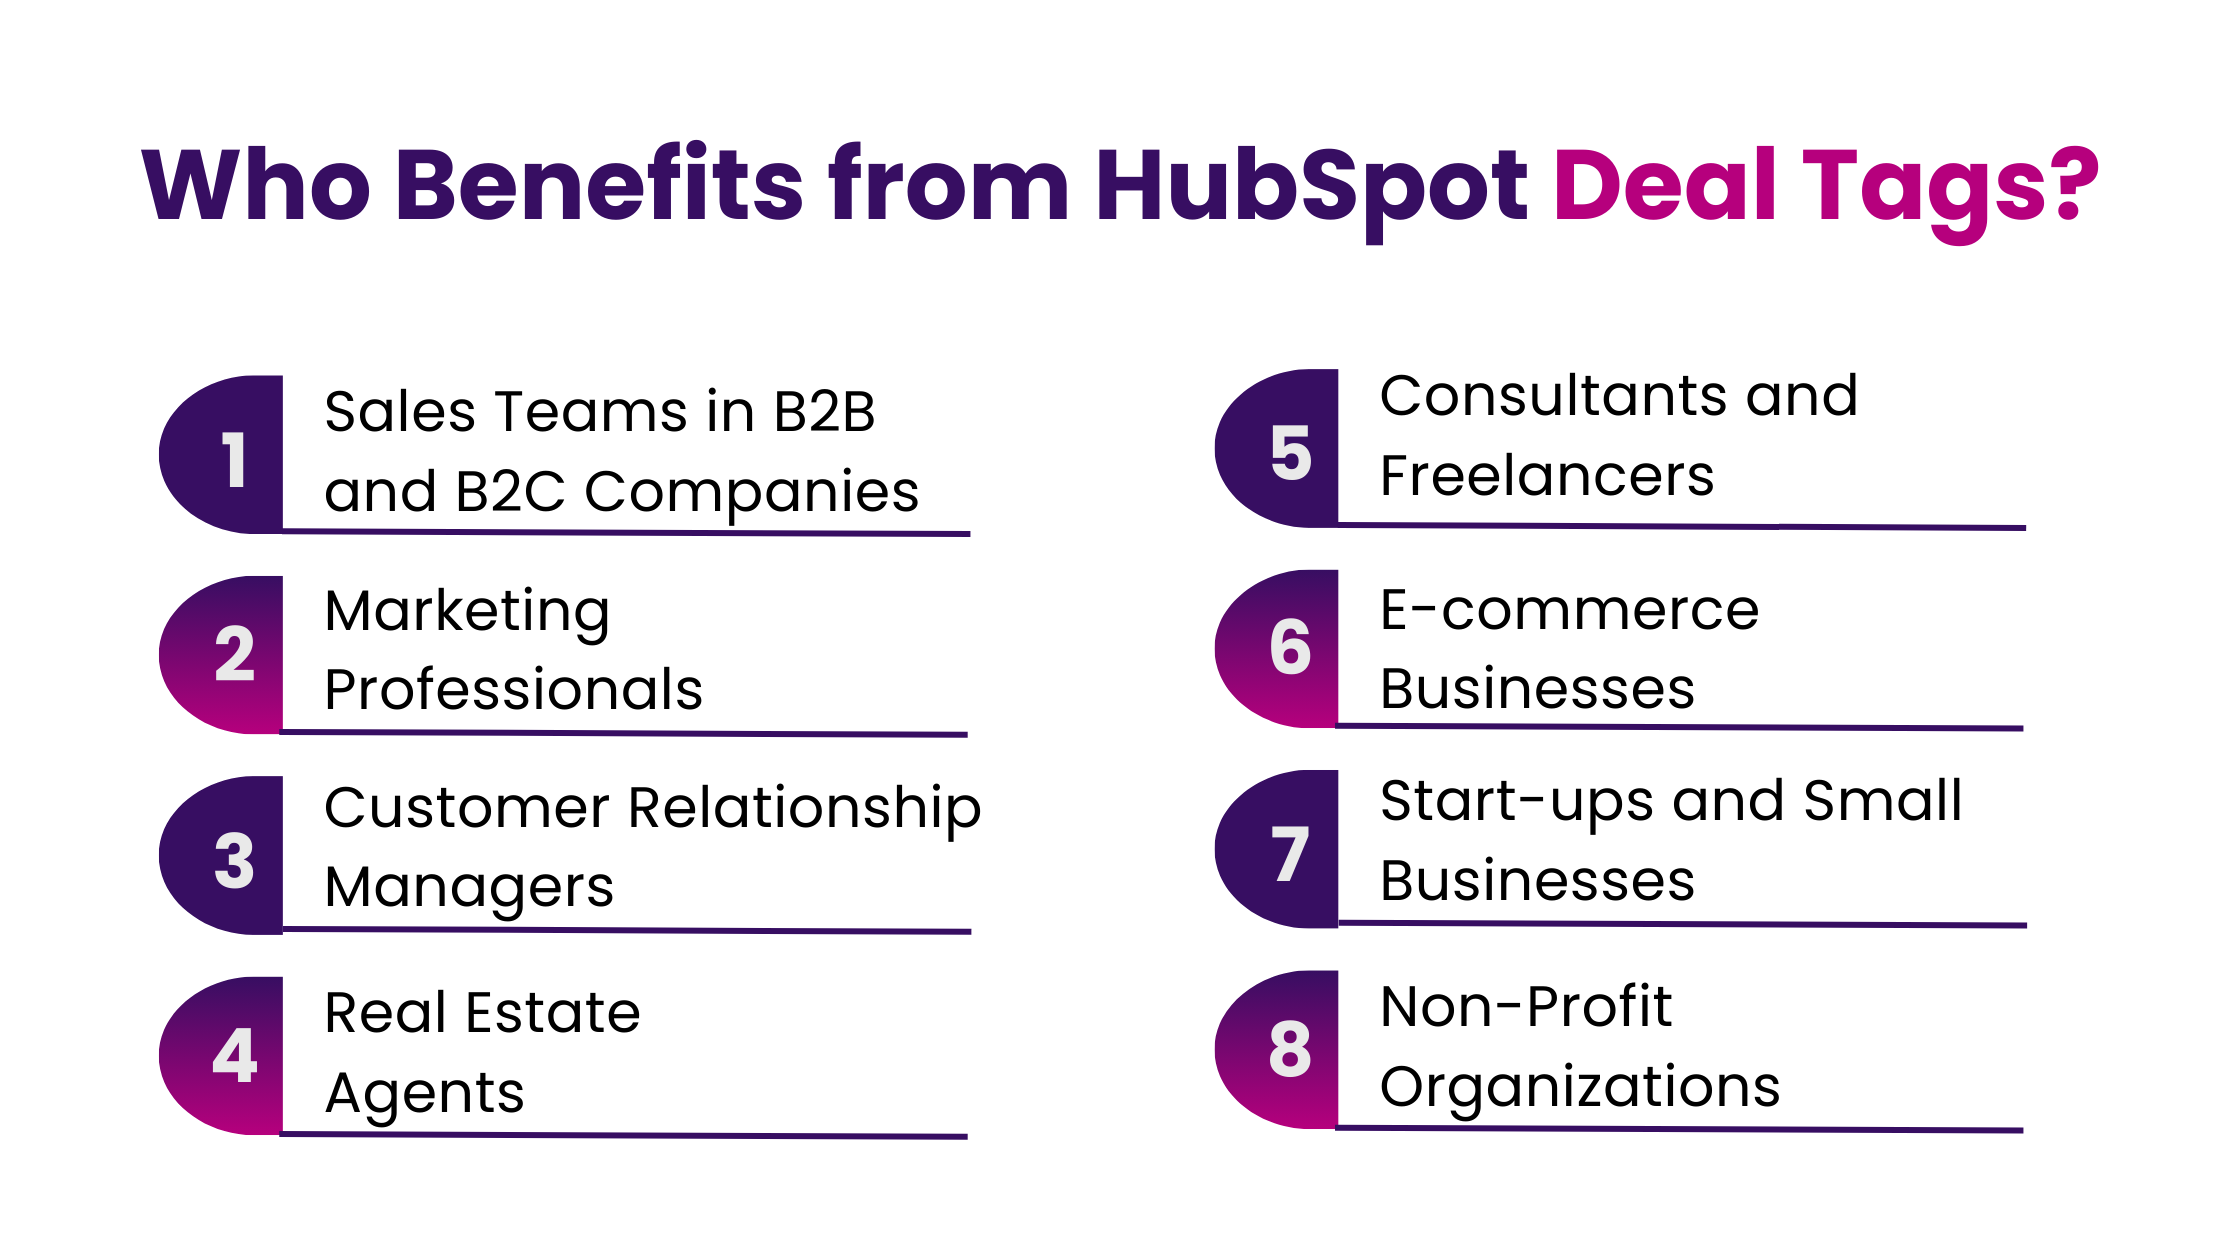 Who Benefits from HubSpot Deal Tags